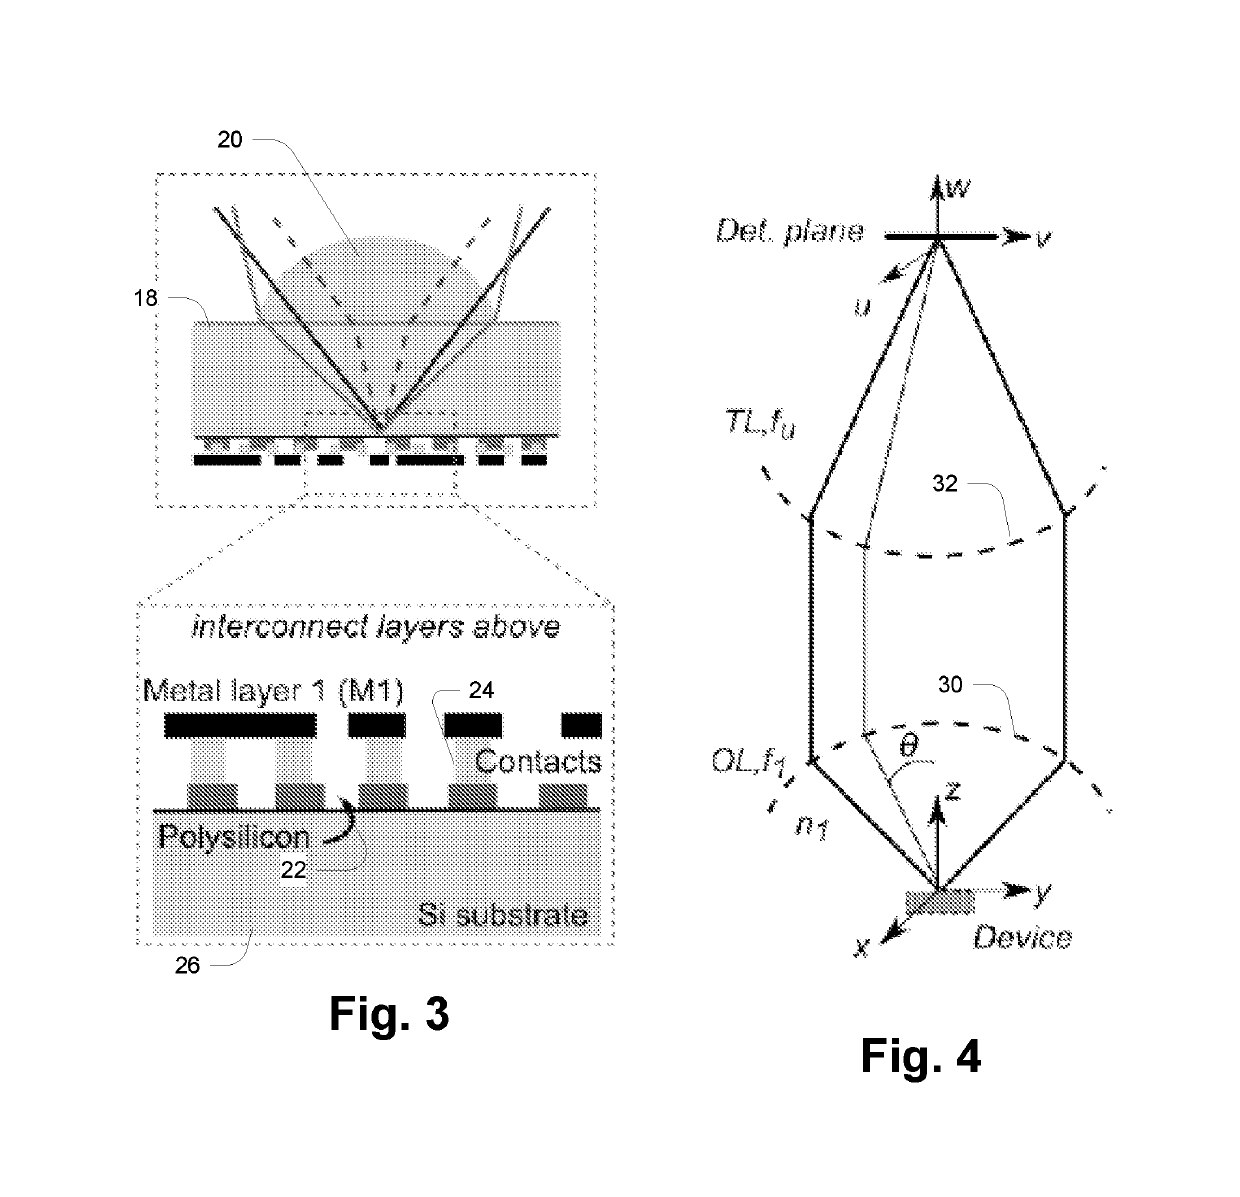 Gate-level mapping of integrated circuits using multi-spectral imaging